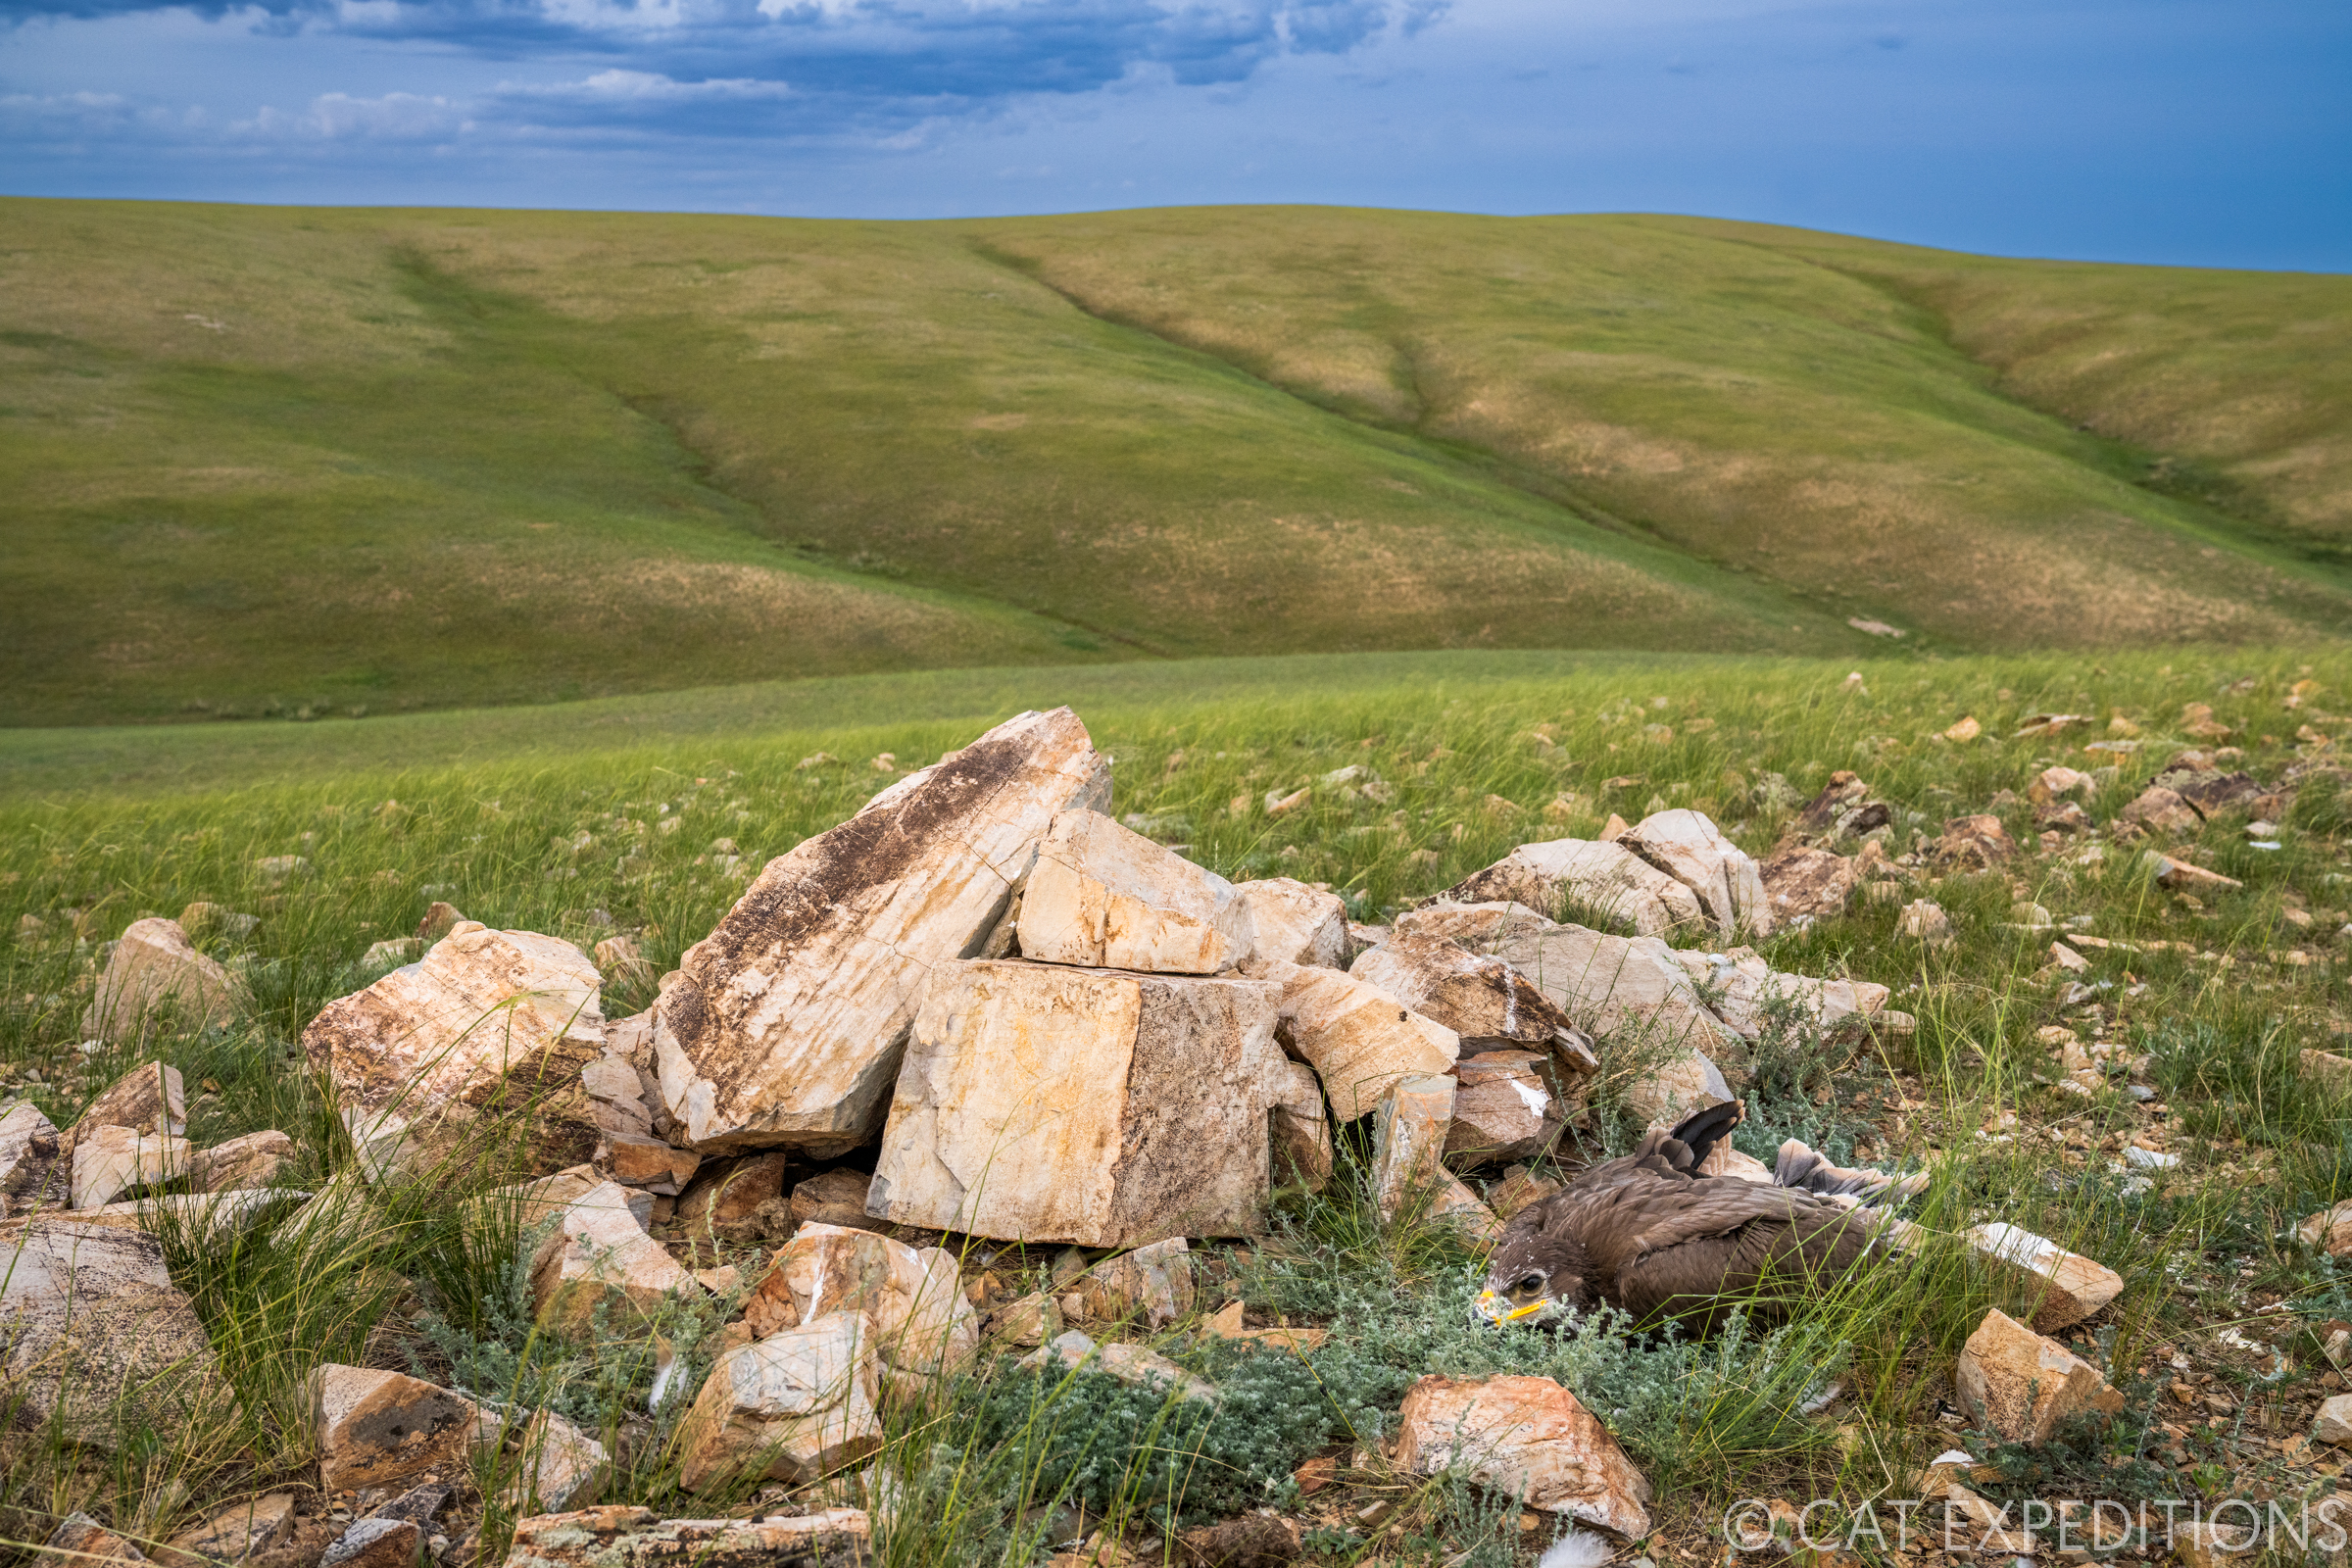 Steppe Eagle (Aquila nipalensis) chick in nest in steppe, Mongolia